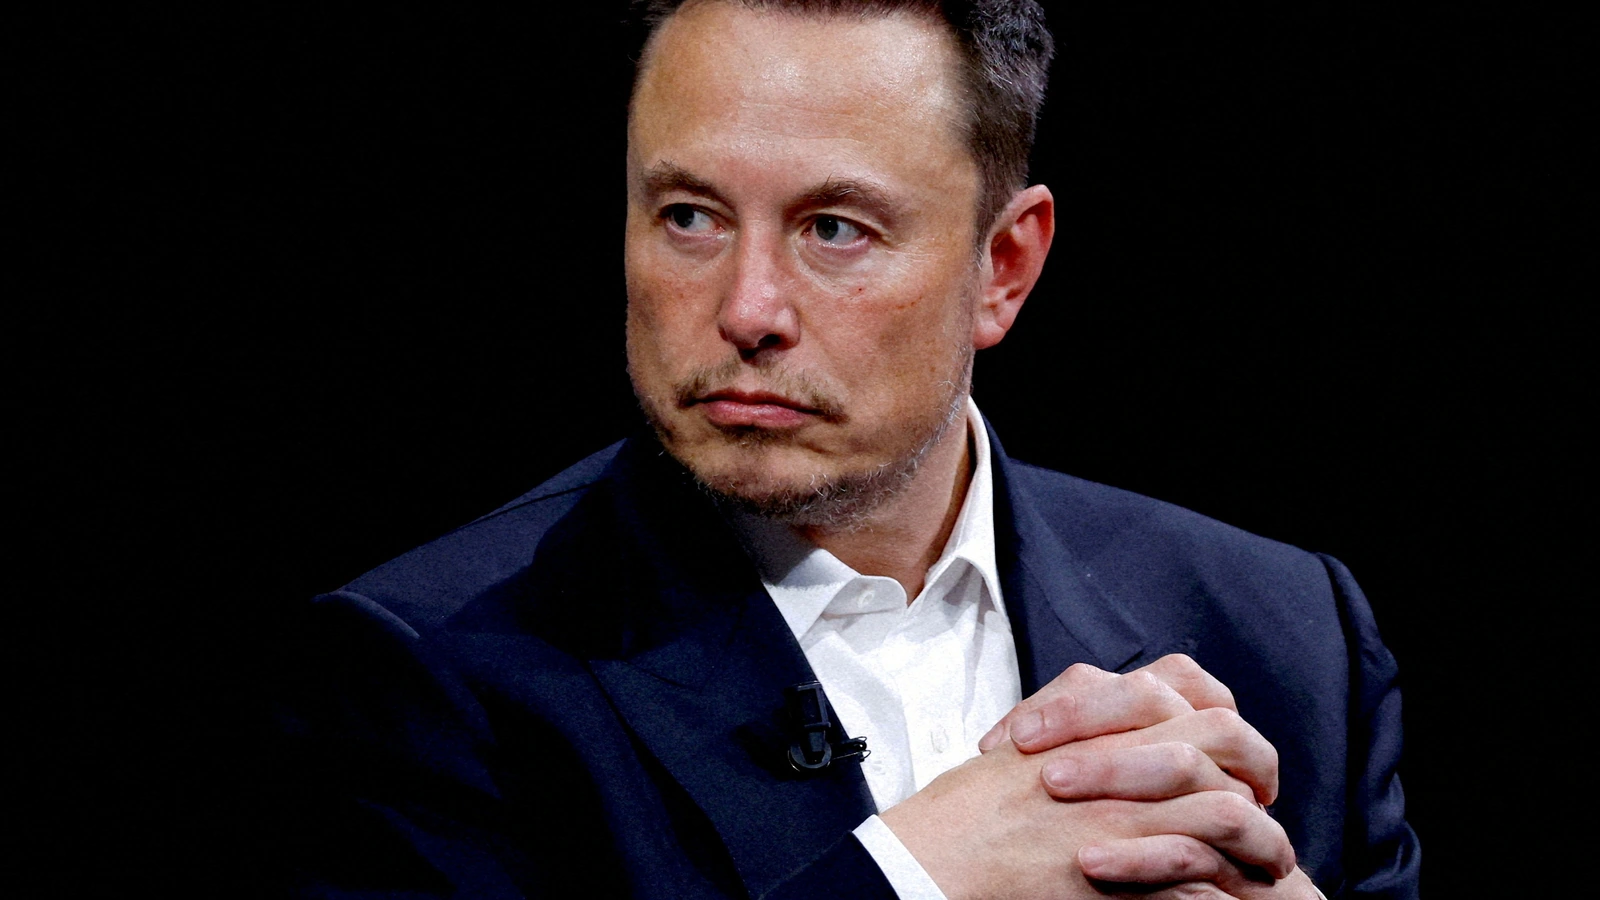 Elon Musk Donated Almost $7 Billion Worth of Stock to His Charity Through Tax-Deductible Gifts.